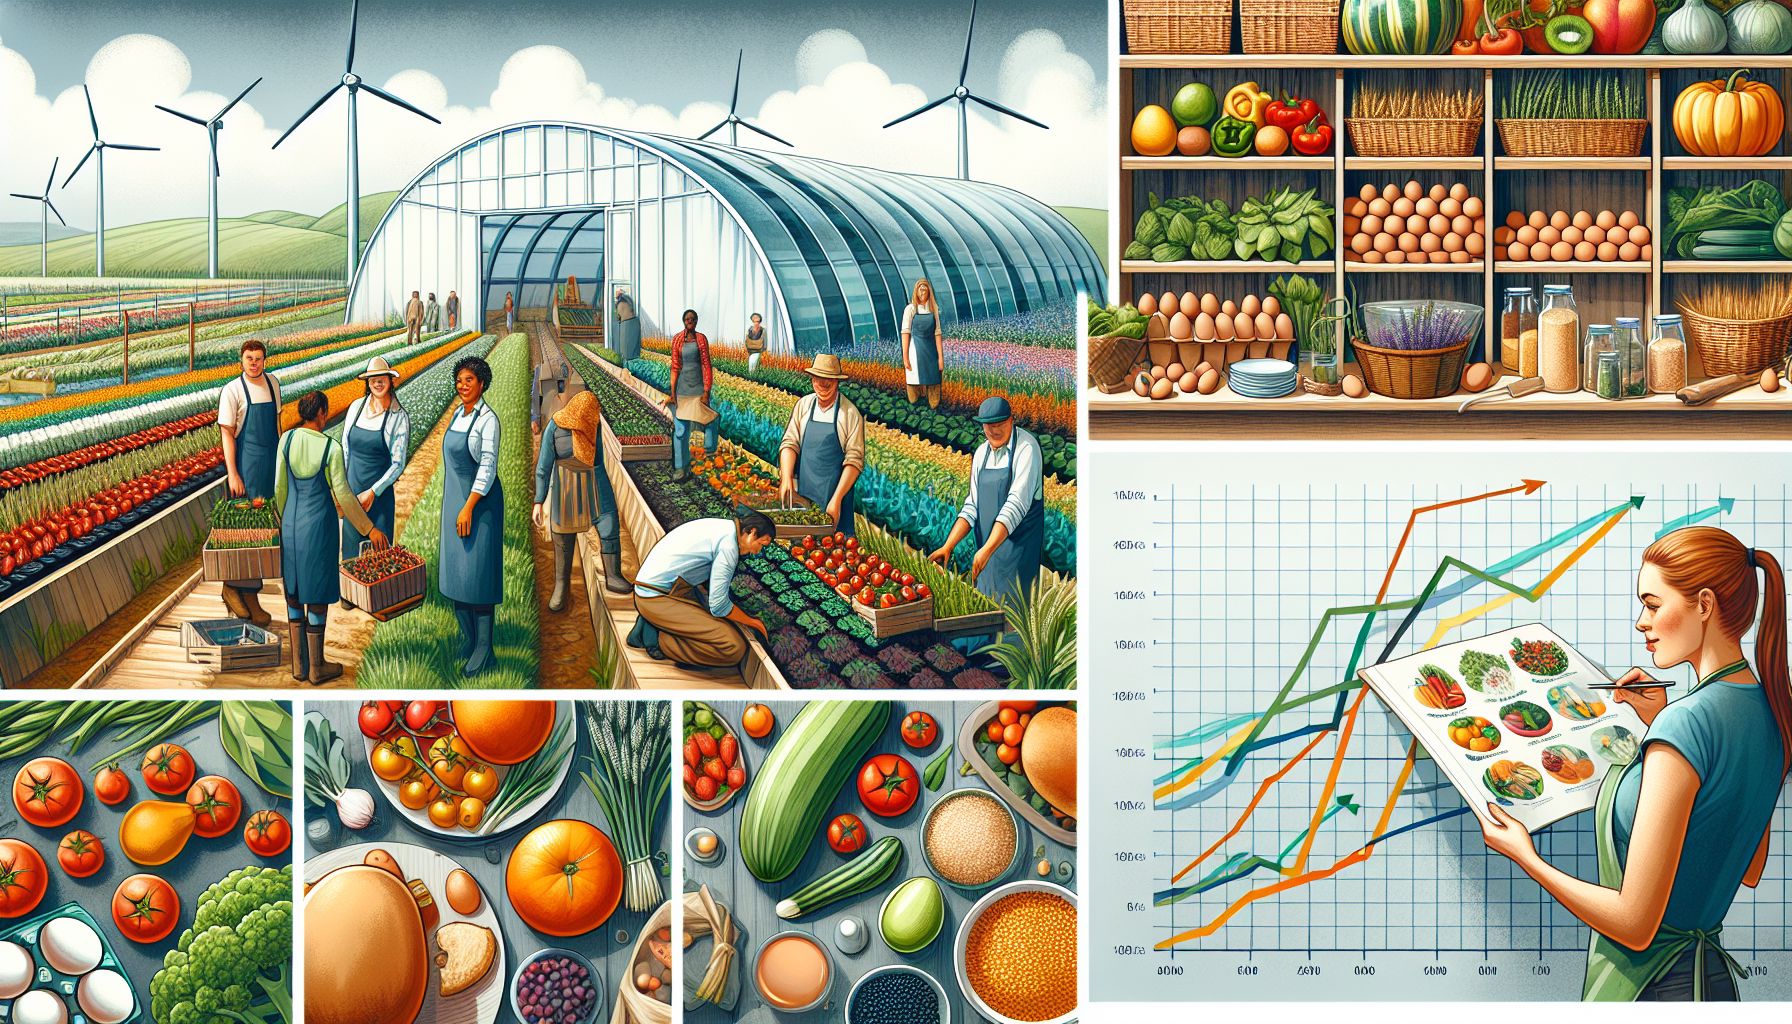 #Farming for a Sustainable Future: Challenges, Trends, and Recipes